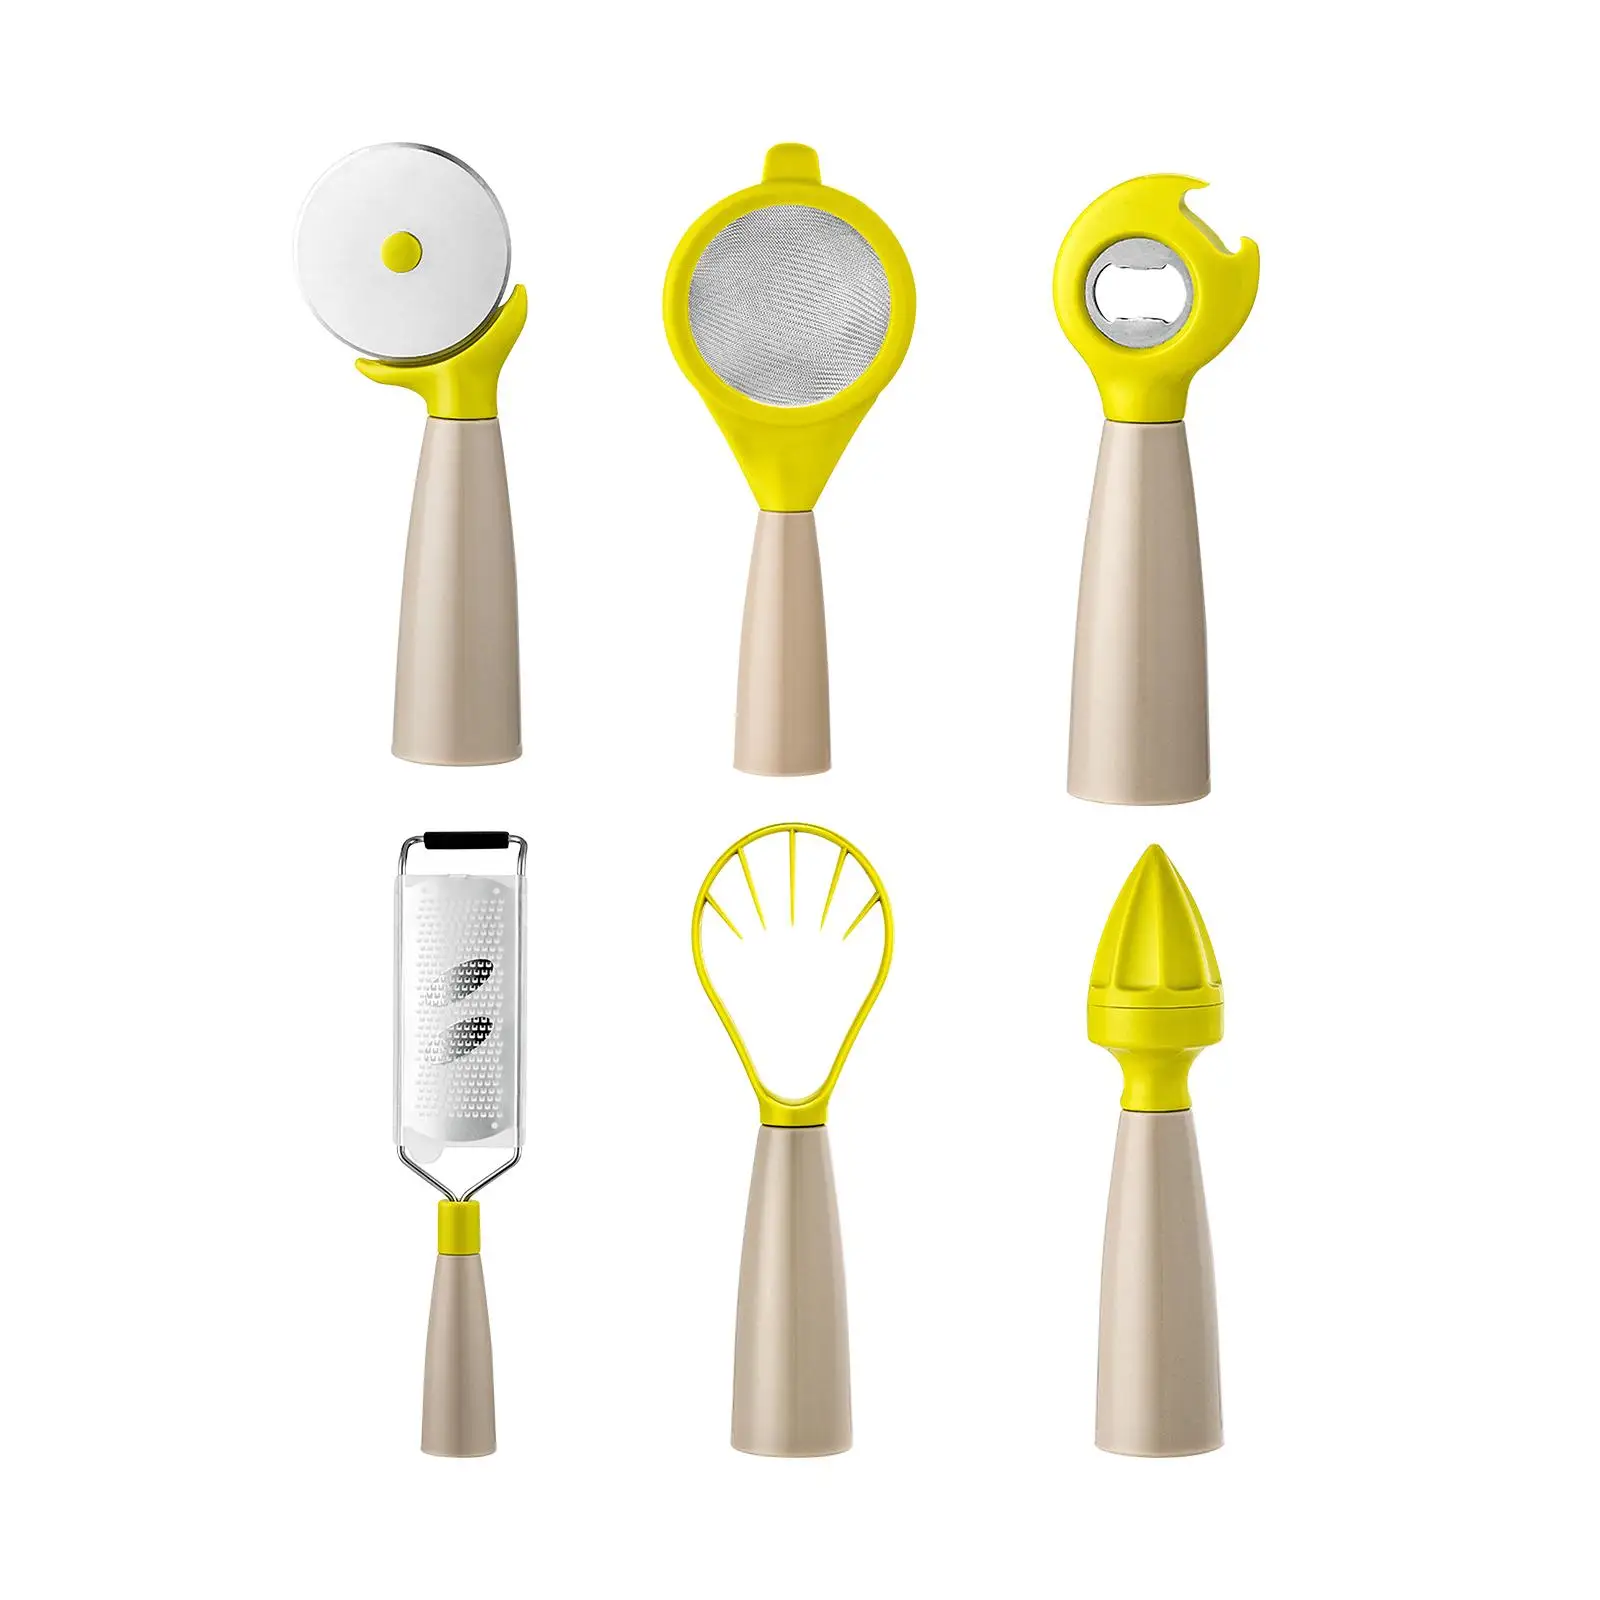 6 Pieces Kitchen Tools Set Strainer Space Saving for Home Kitchen